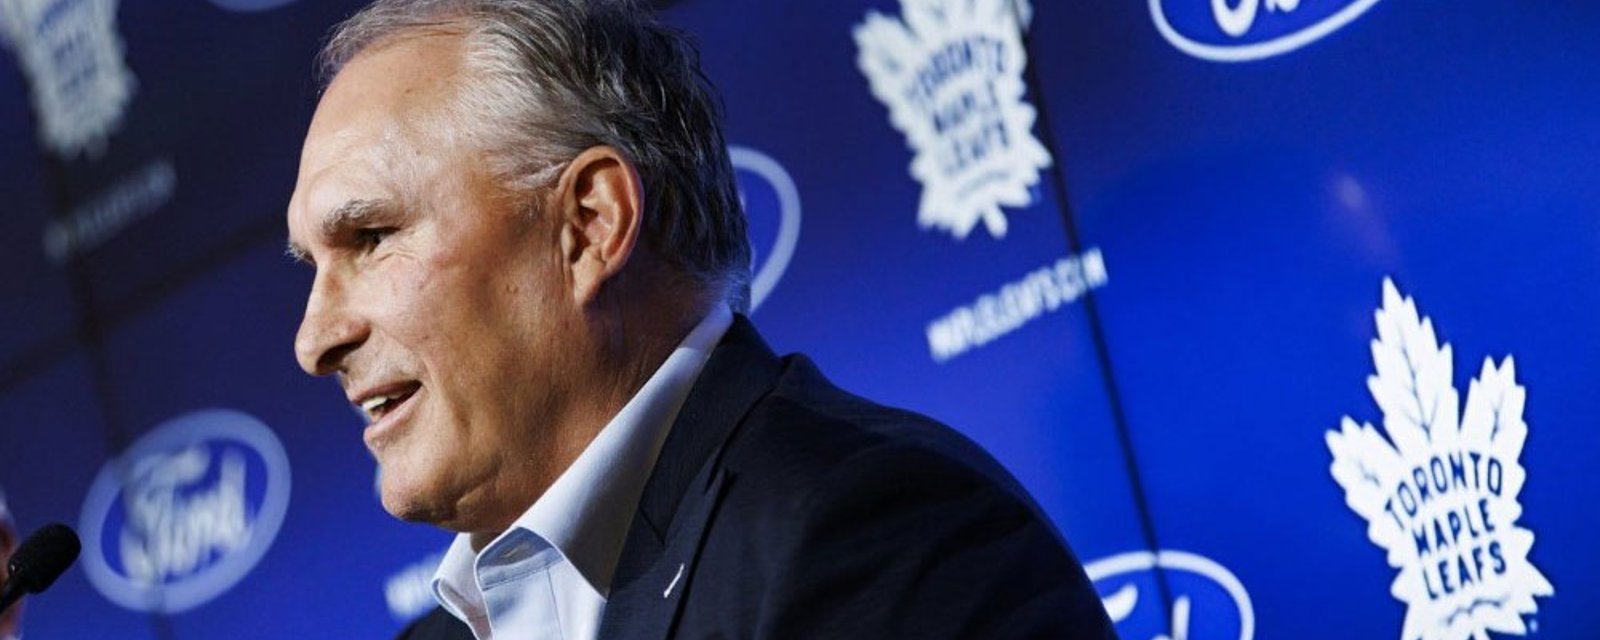 Berube meets with the media, tells fans what to expect from the “new” Toronto Maple Leafs